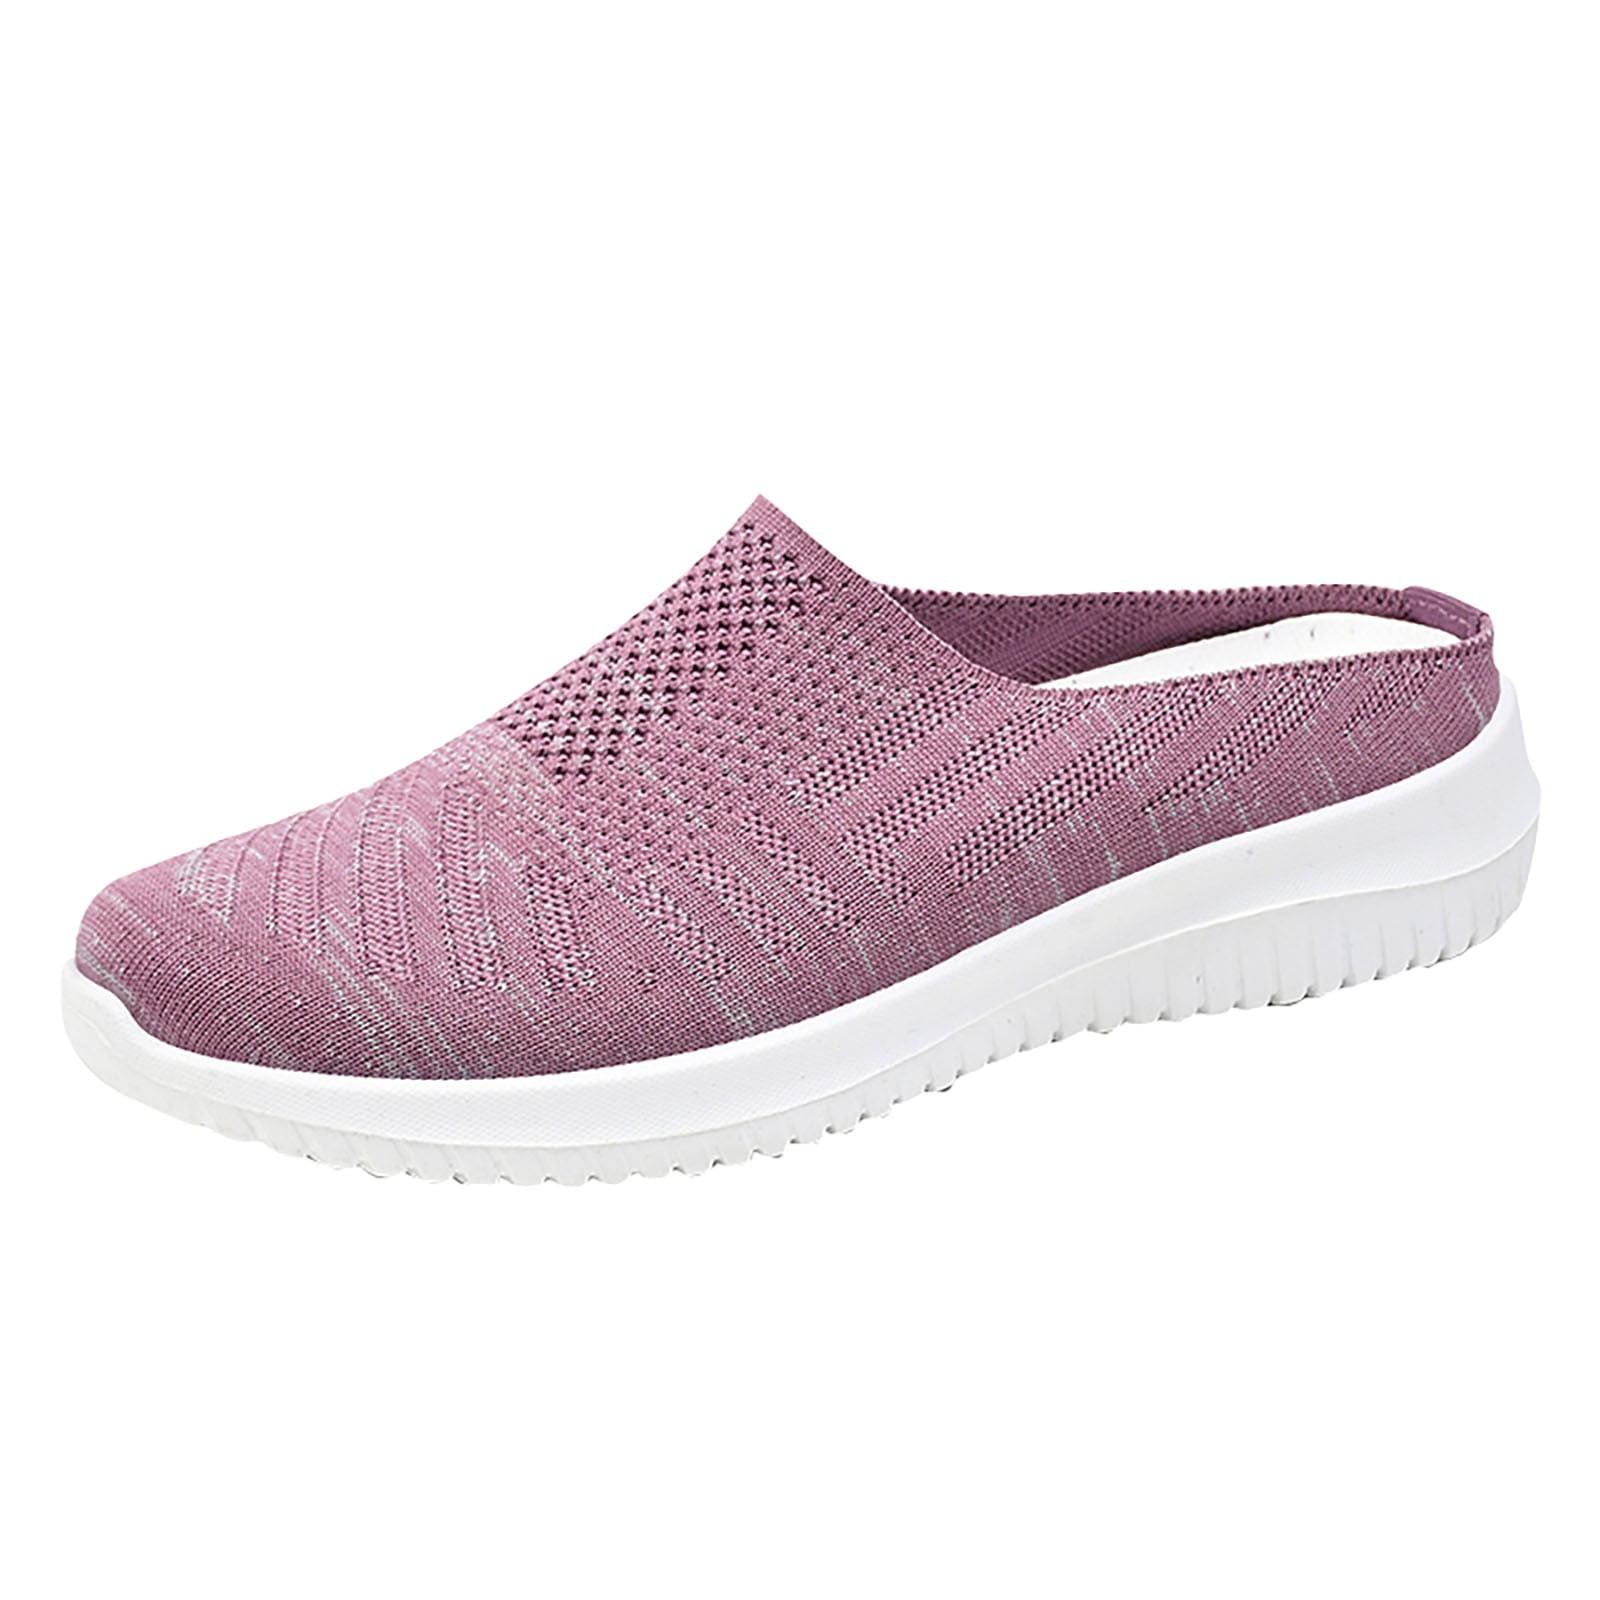 Hollow Out Women's Ladies Mesh Shoes Sneakers Footwear Flat Breathable ...